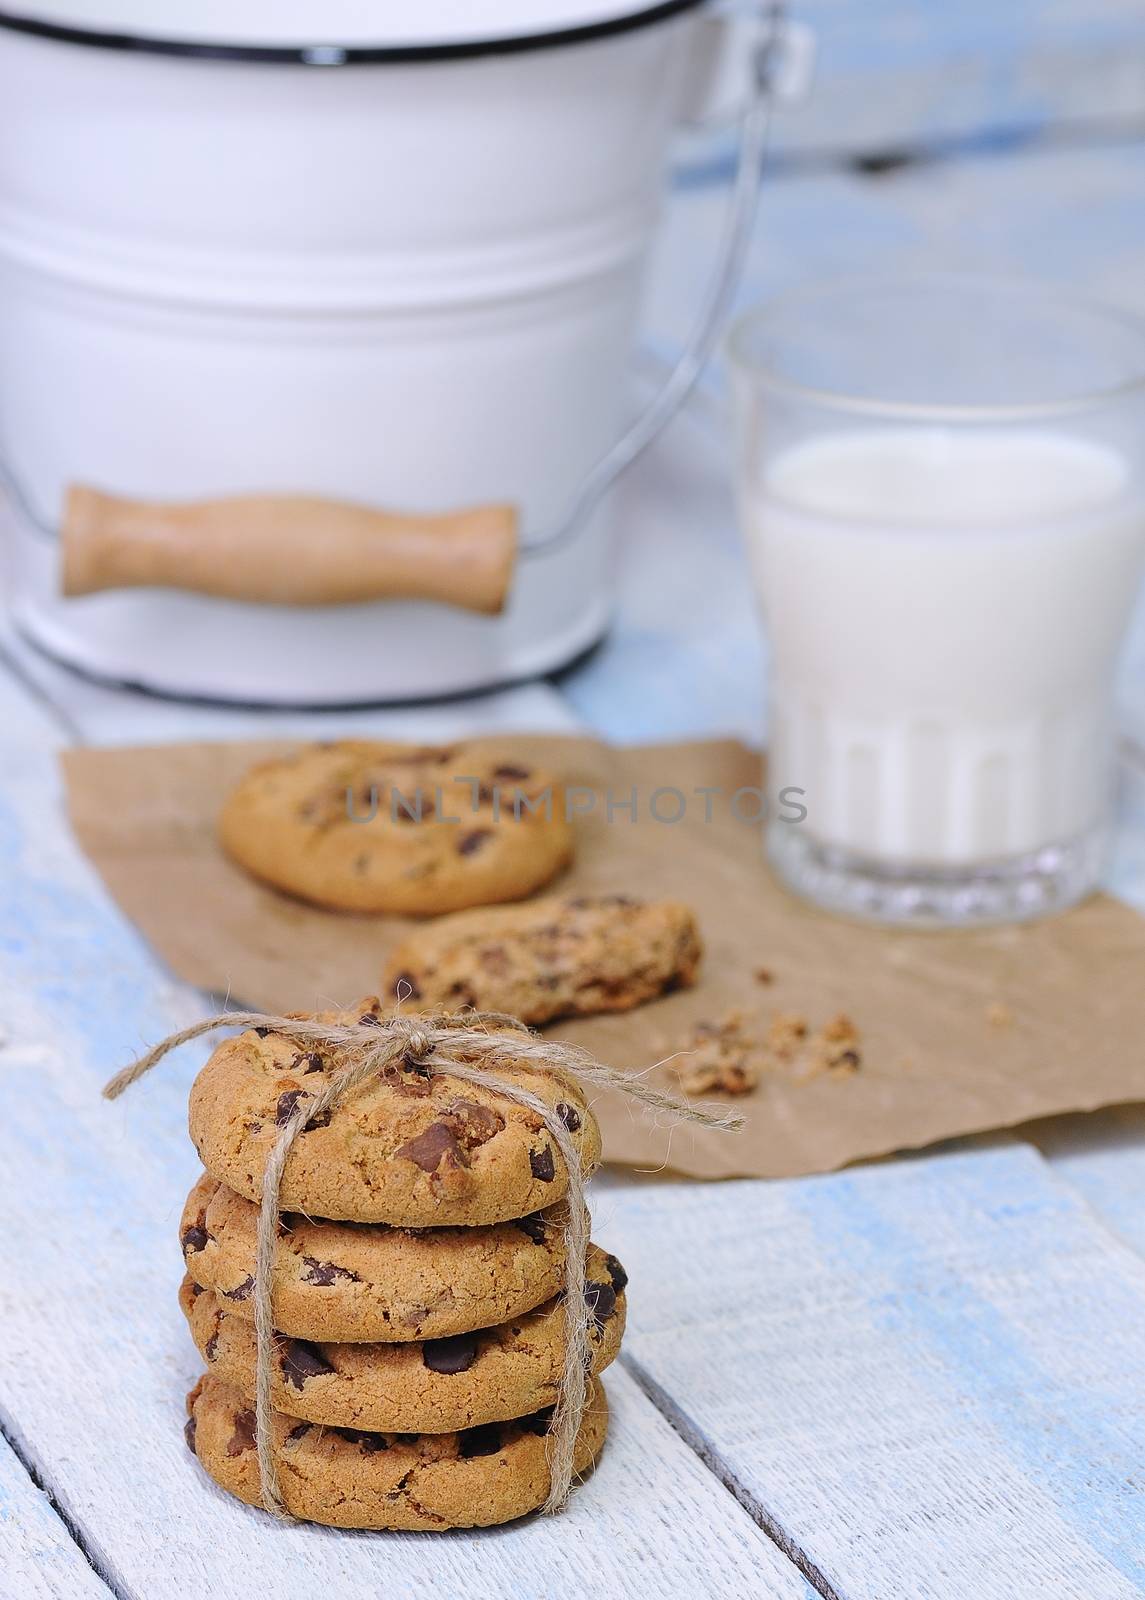 Homemade cookies with glass of milk on wooden table.